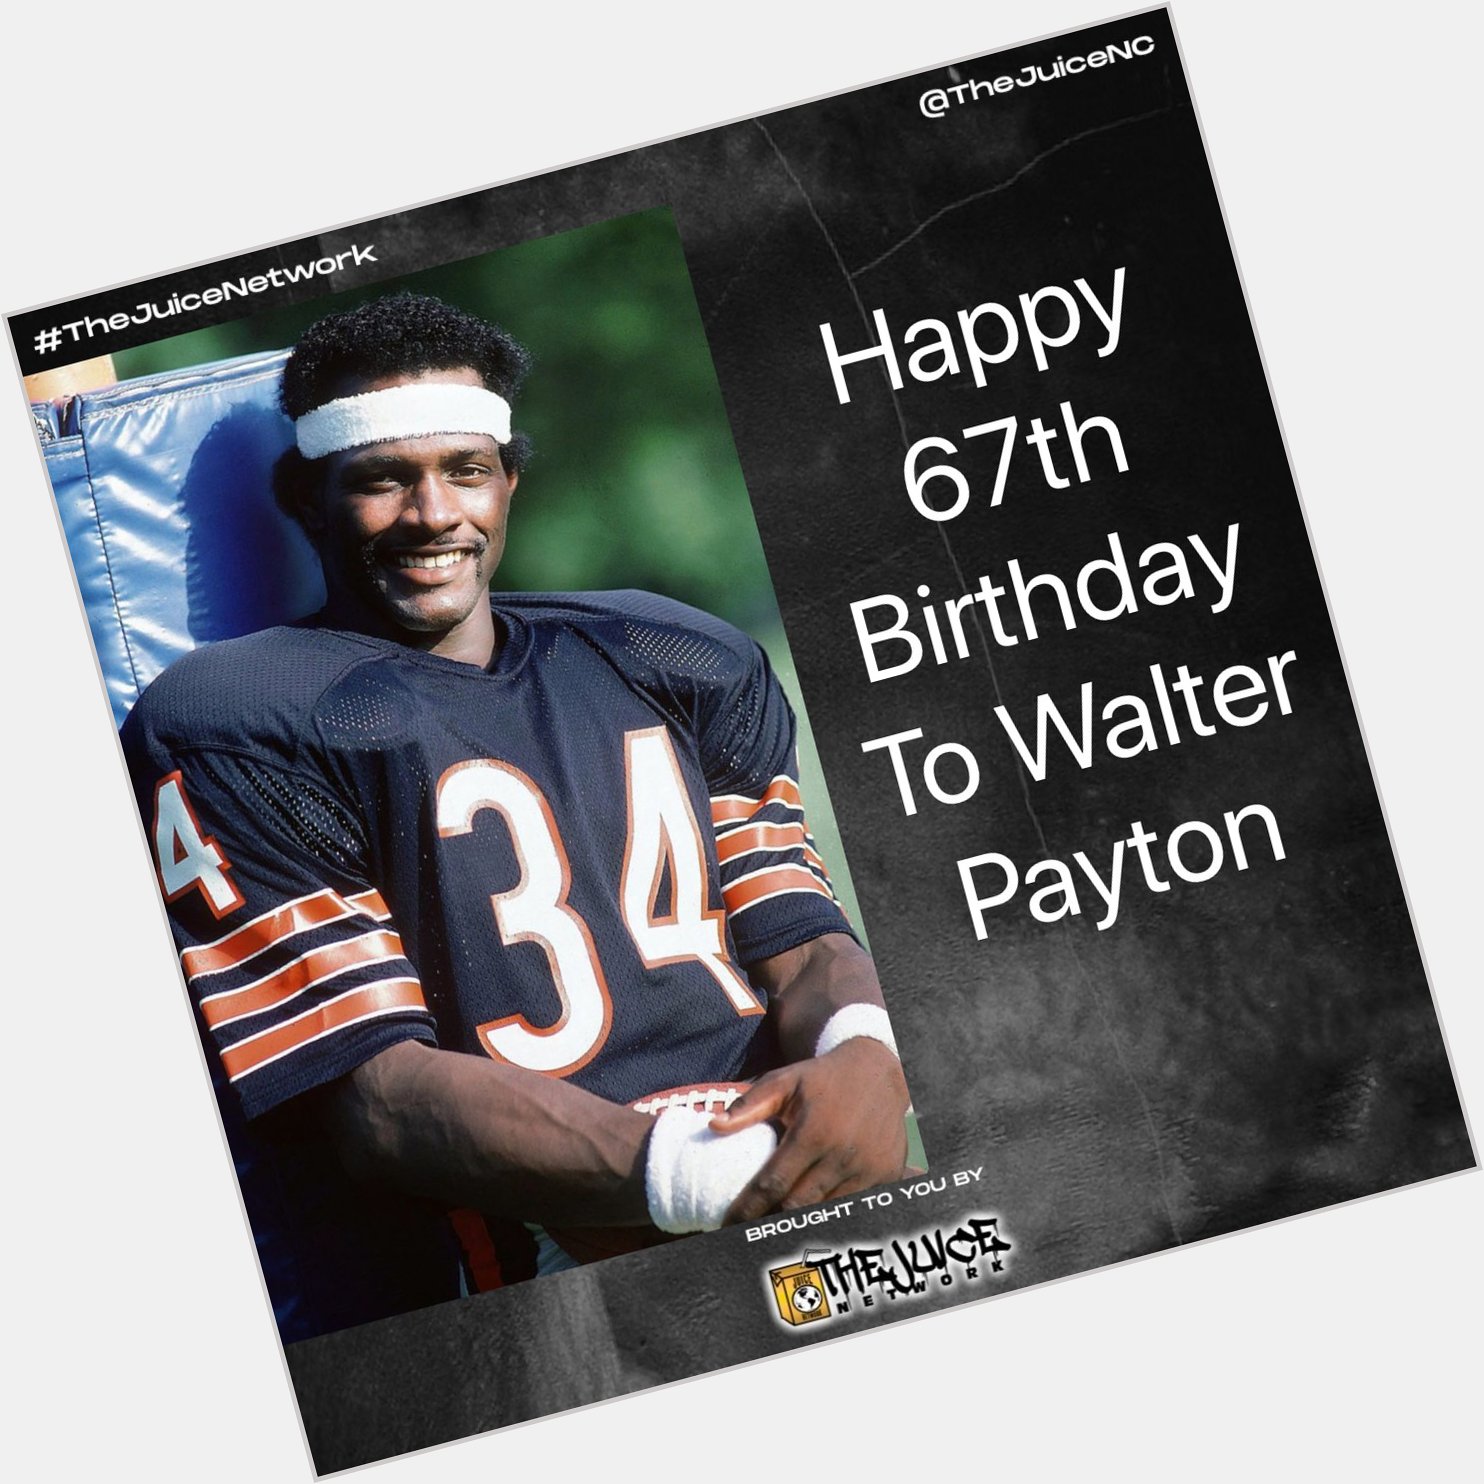 Happy 67th birthday to Walter Payton!

Rest In Peace       